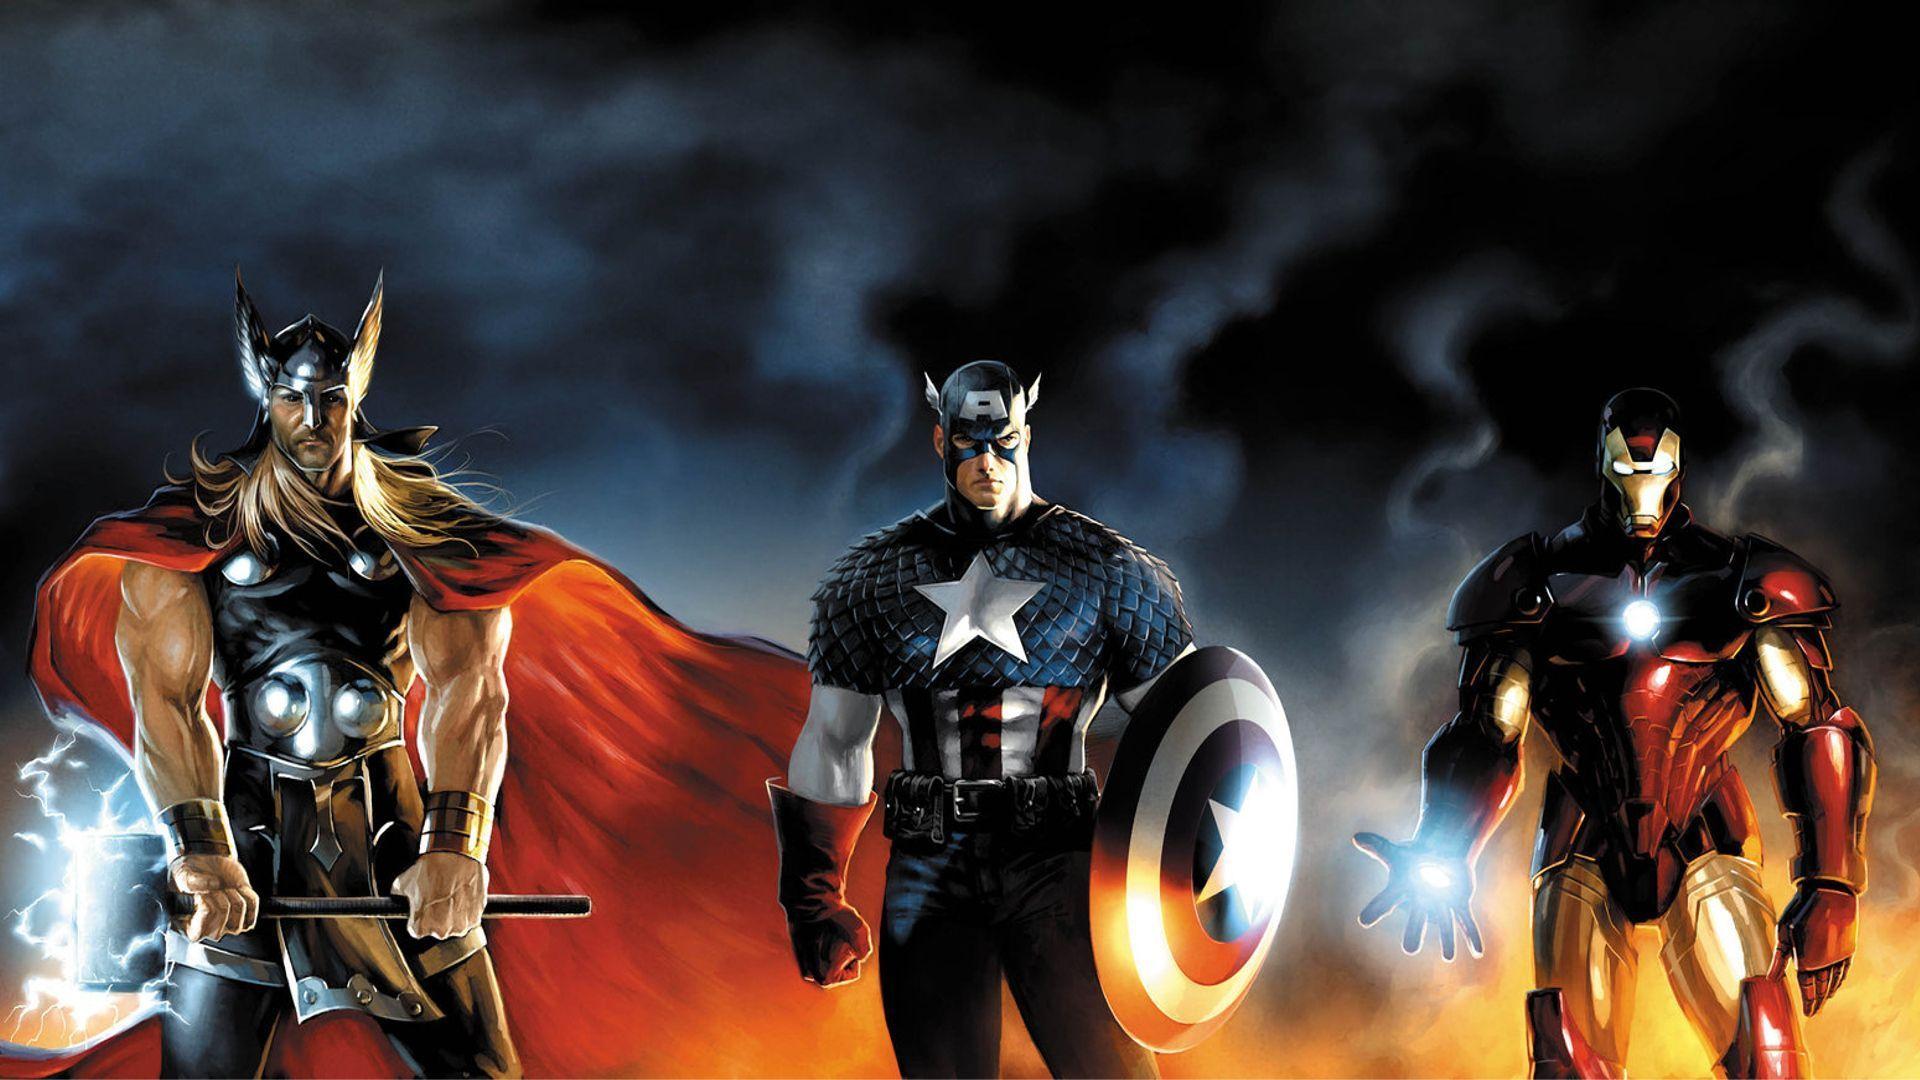 Marvel Avengers Hd Wallpapers Download High 1920x1080PX ~ Marvel